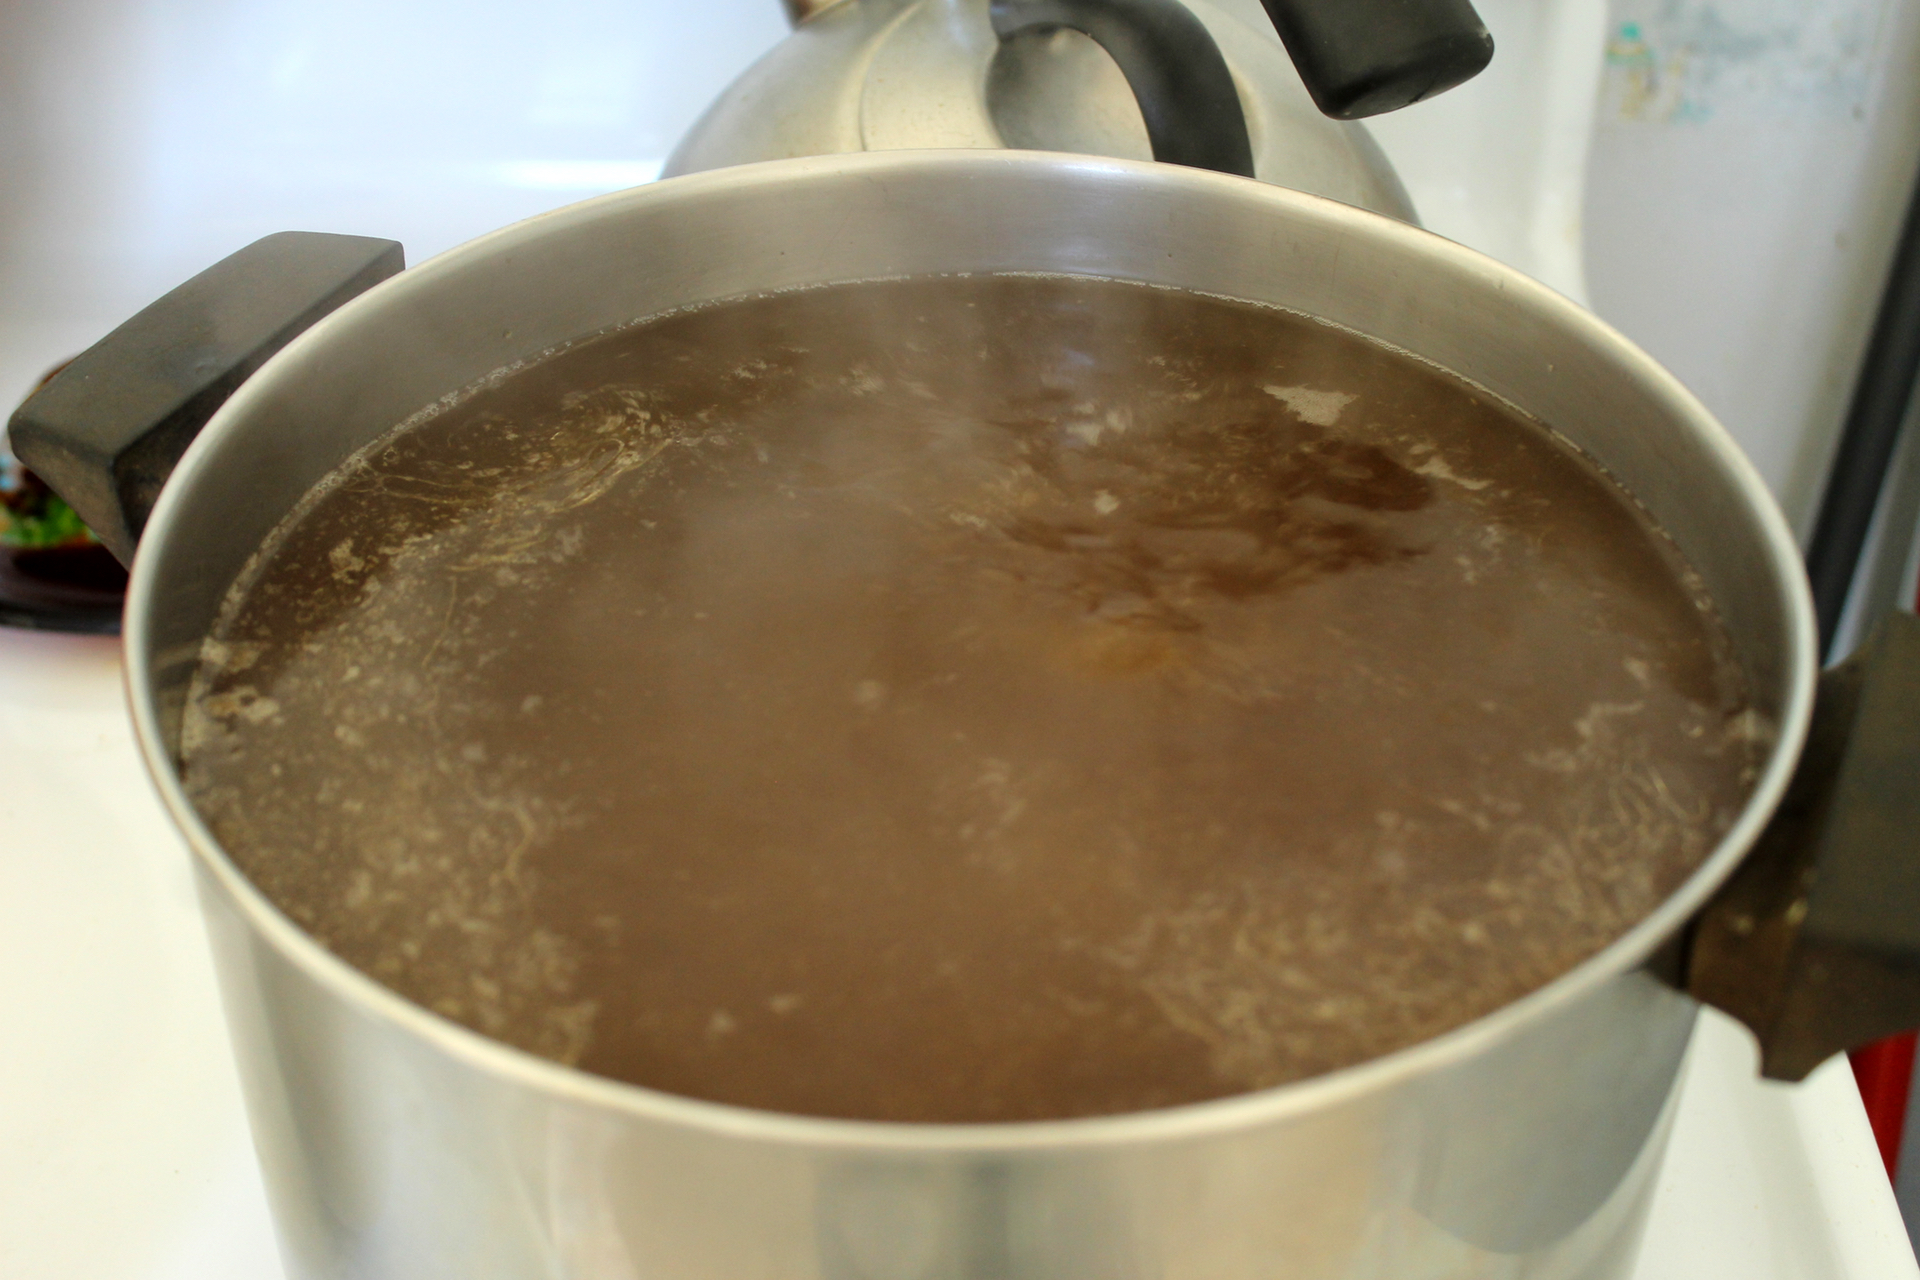 Reducing the strained broth further concentrates flavor and nutritional goodies.